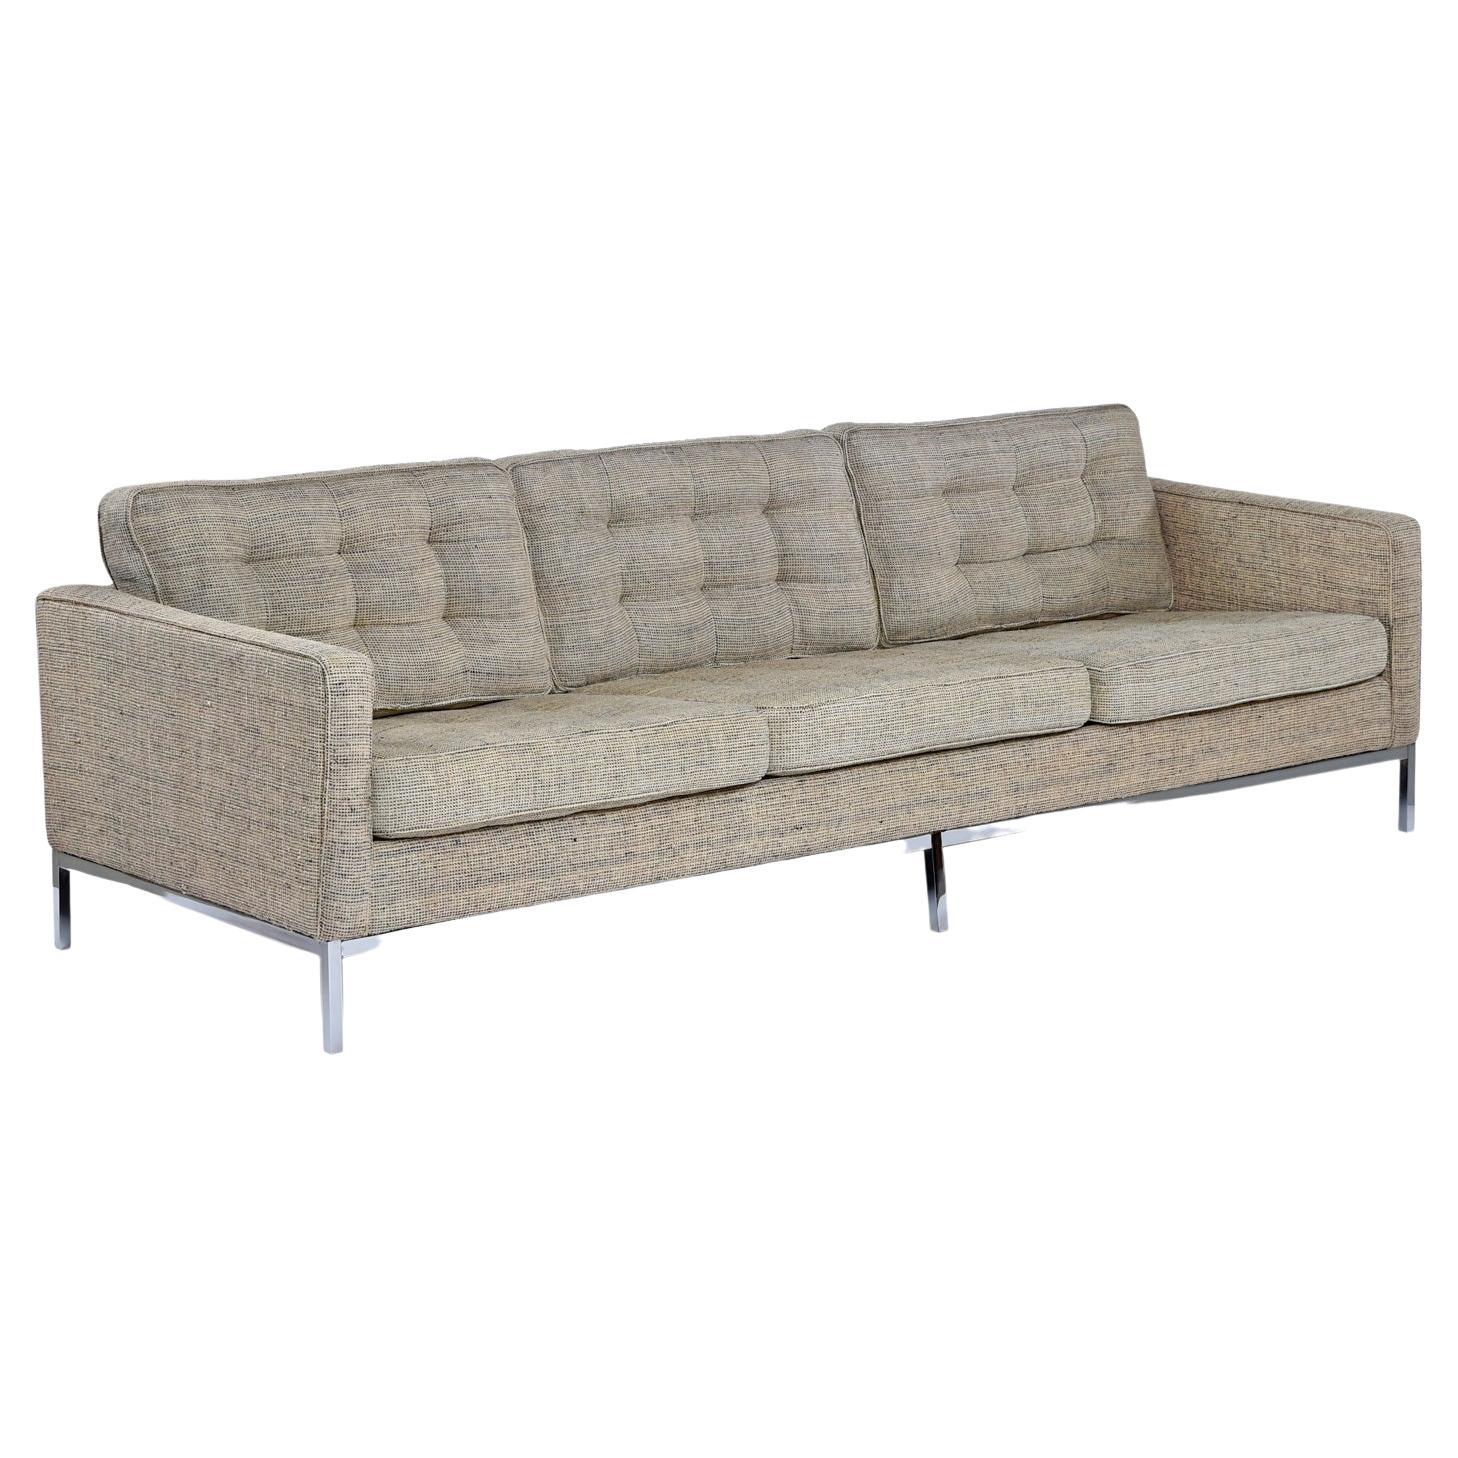 American Florence Knoll Sofa & Chair Set on Steel Bases in Heather Grey Tweed Fabric